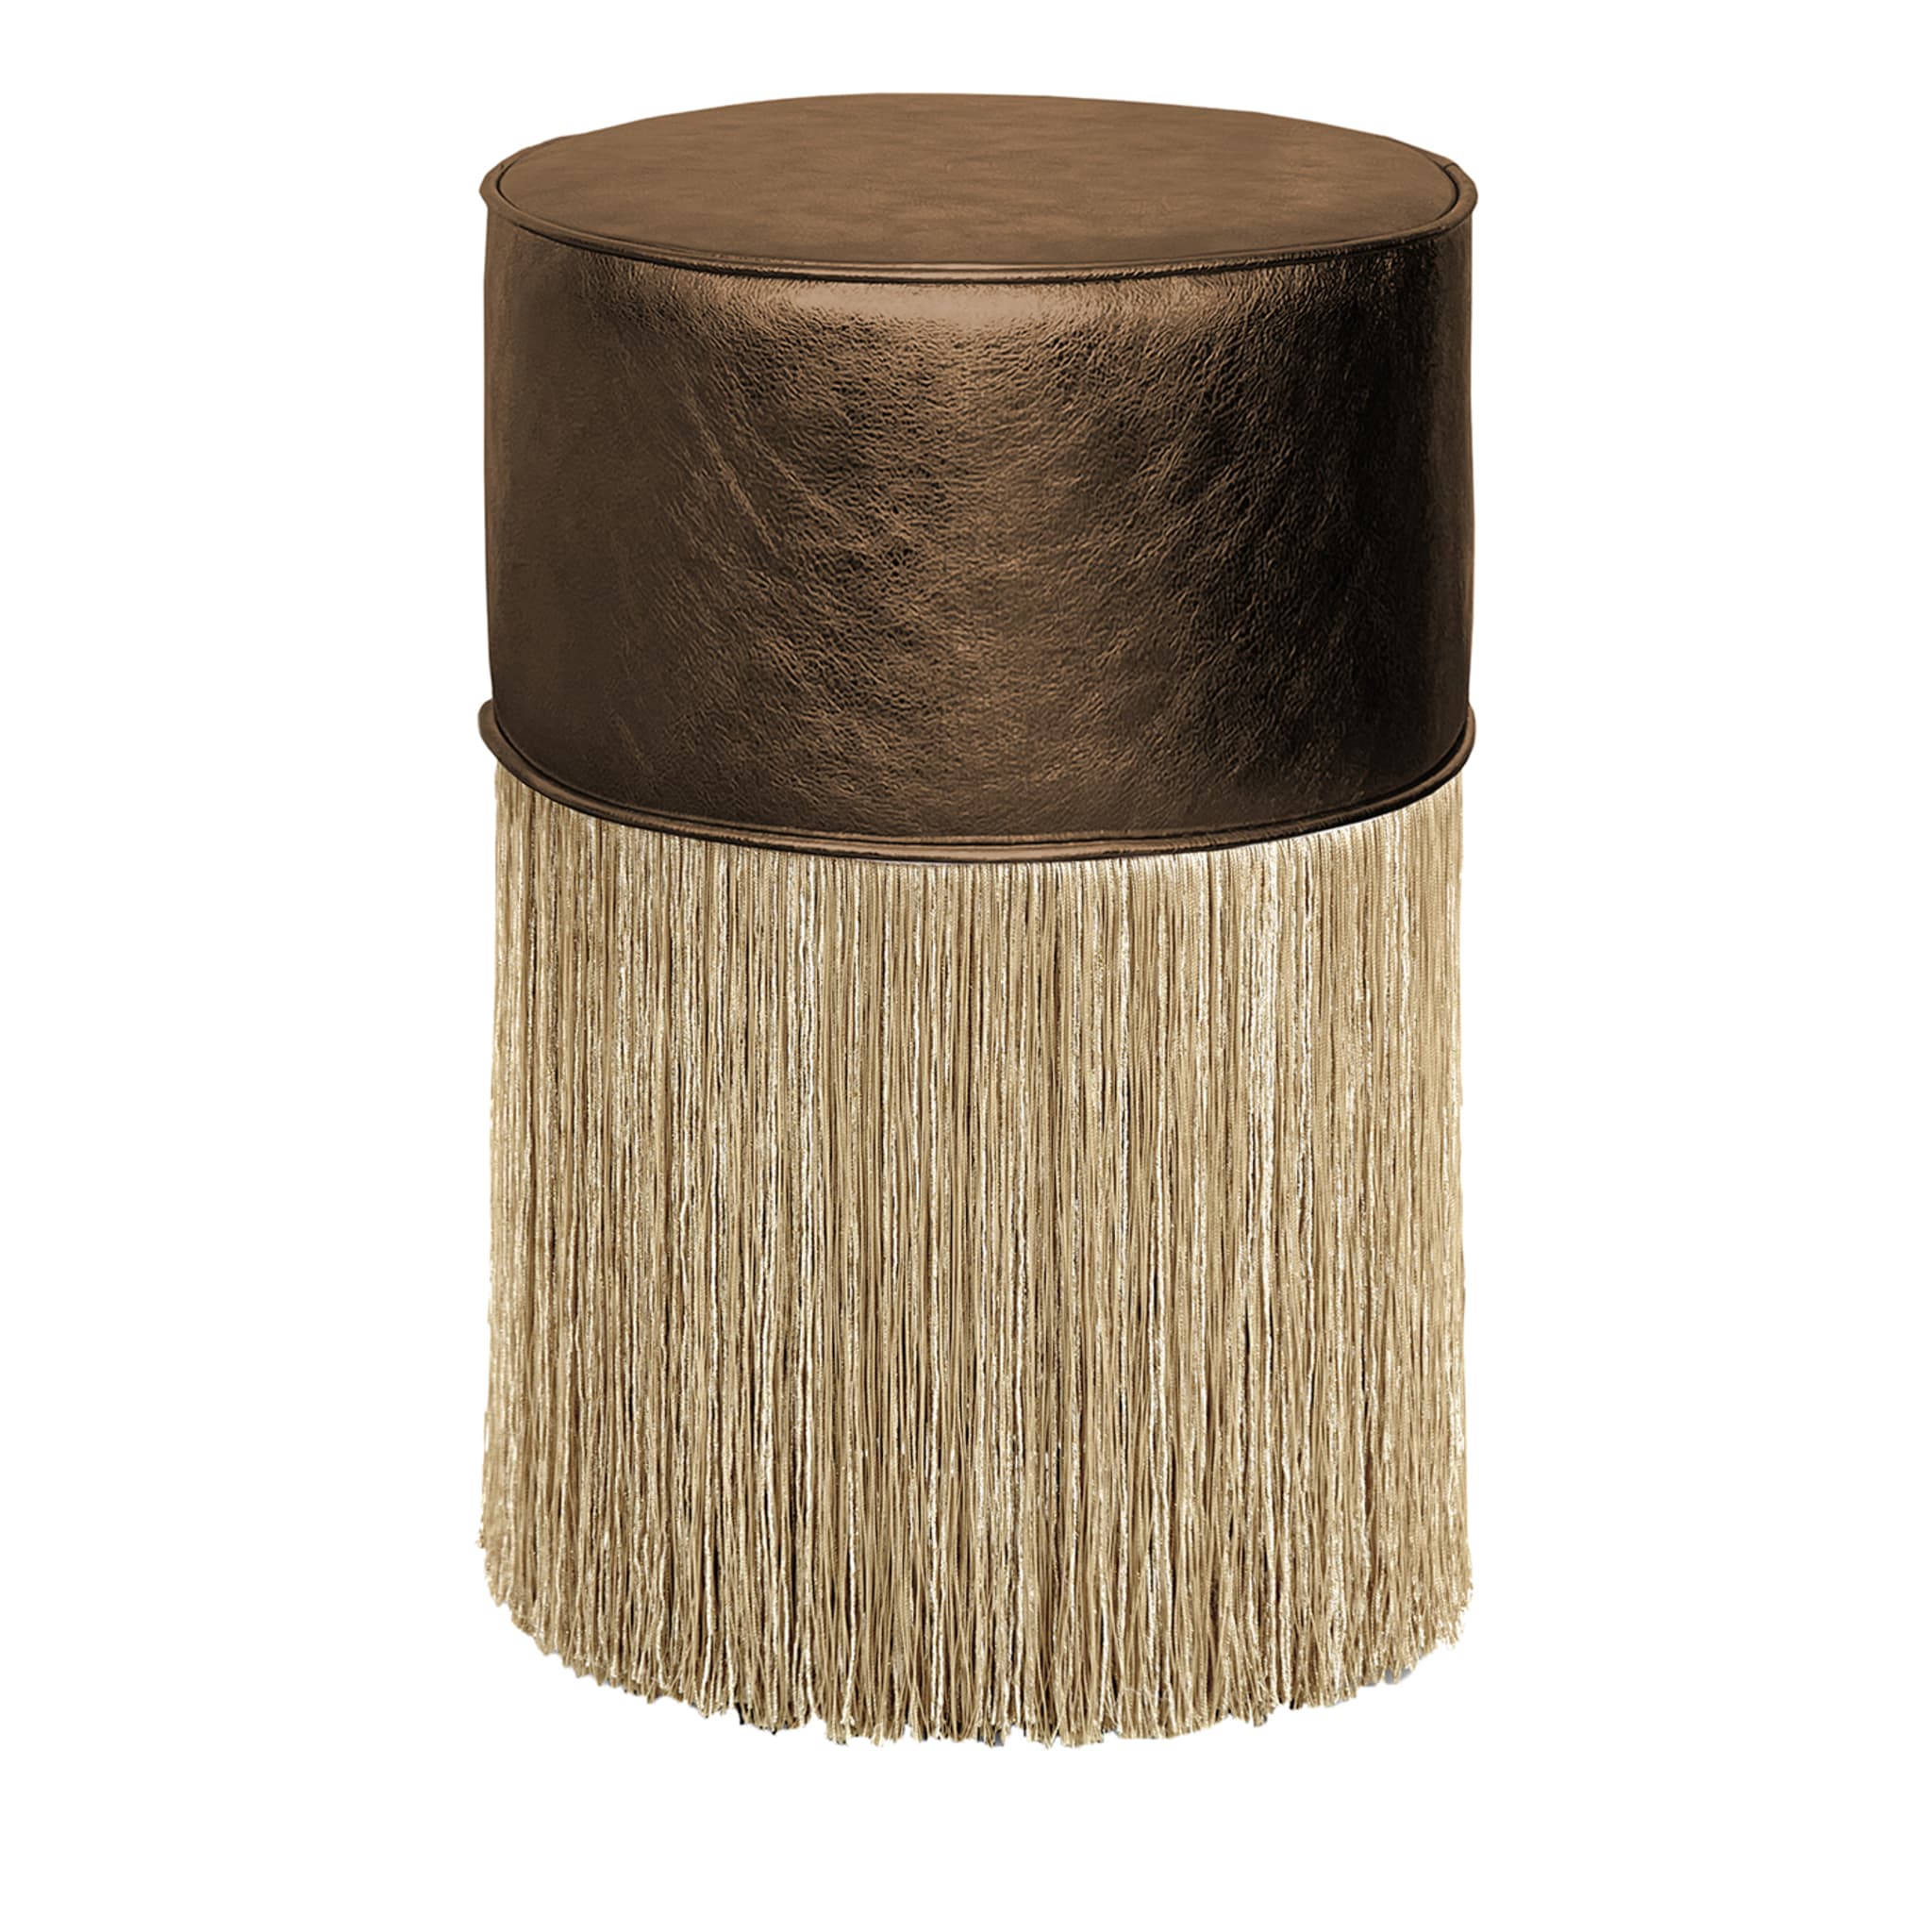 Gleaming Brown Leather Gold Fringes Pouf by Lorenza Bozzoli - Main view